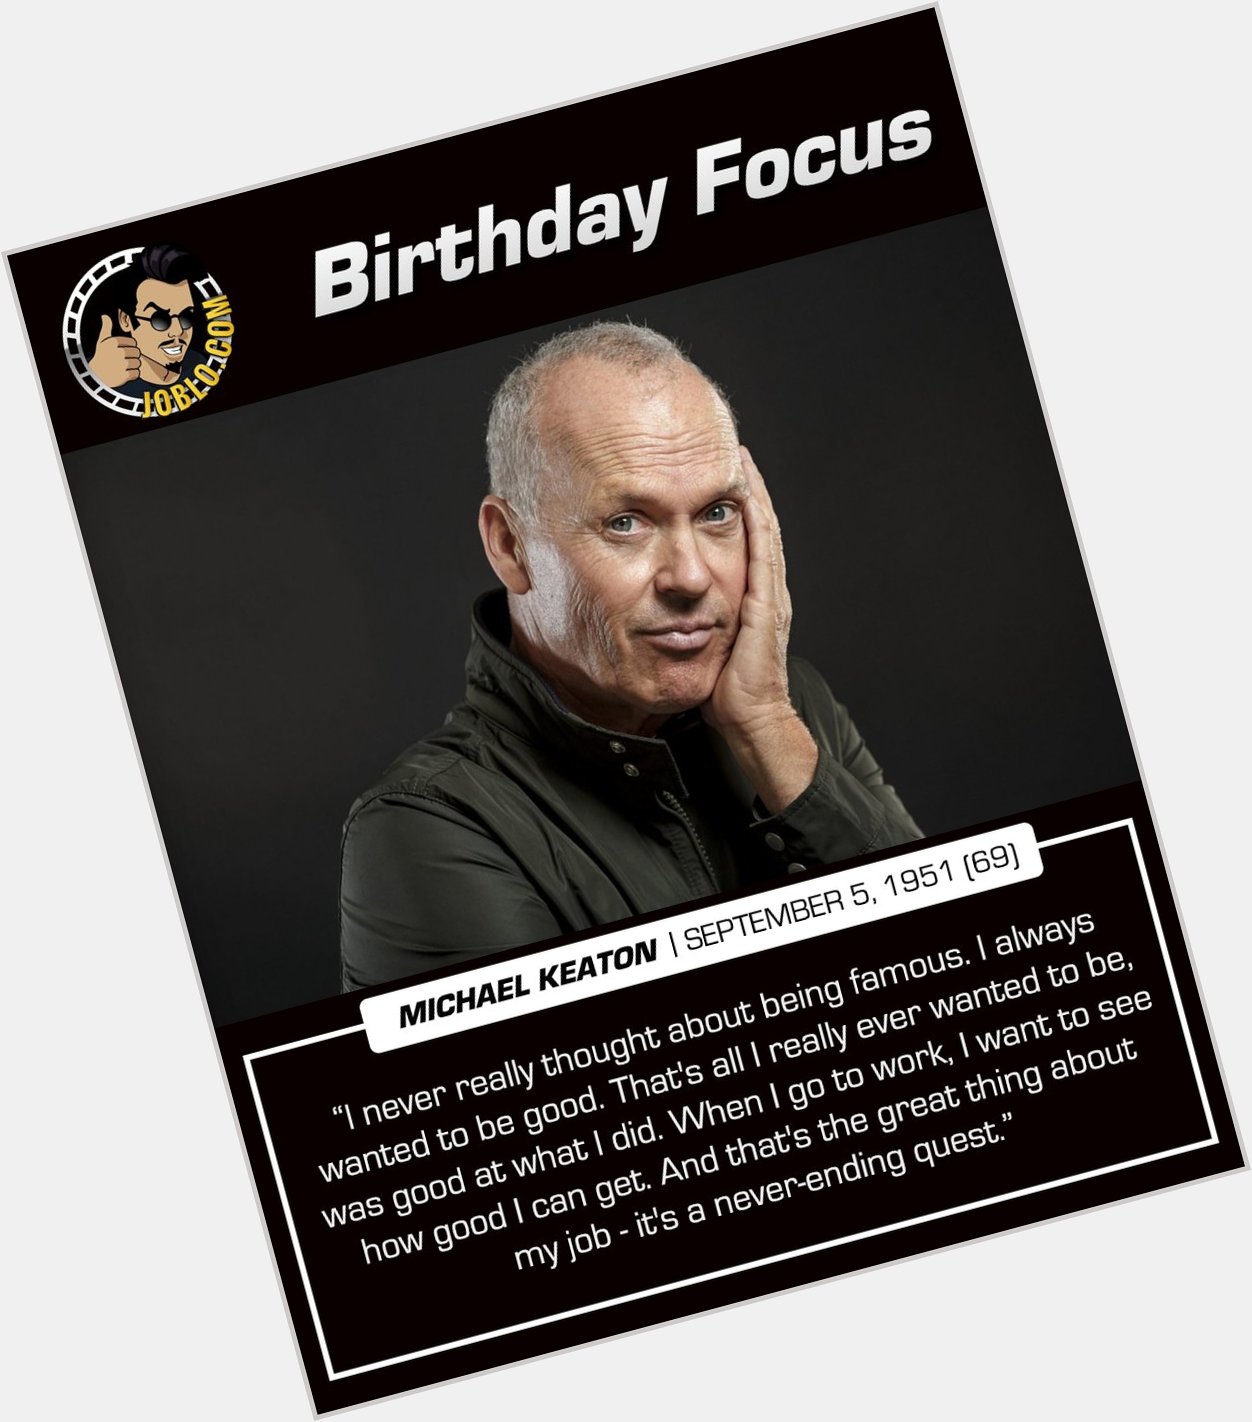 Happy 69th birthday to Michael Keaton!

What\s your favorite film of his? 